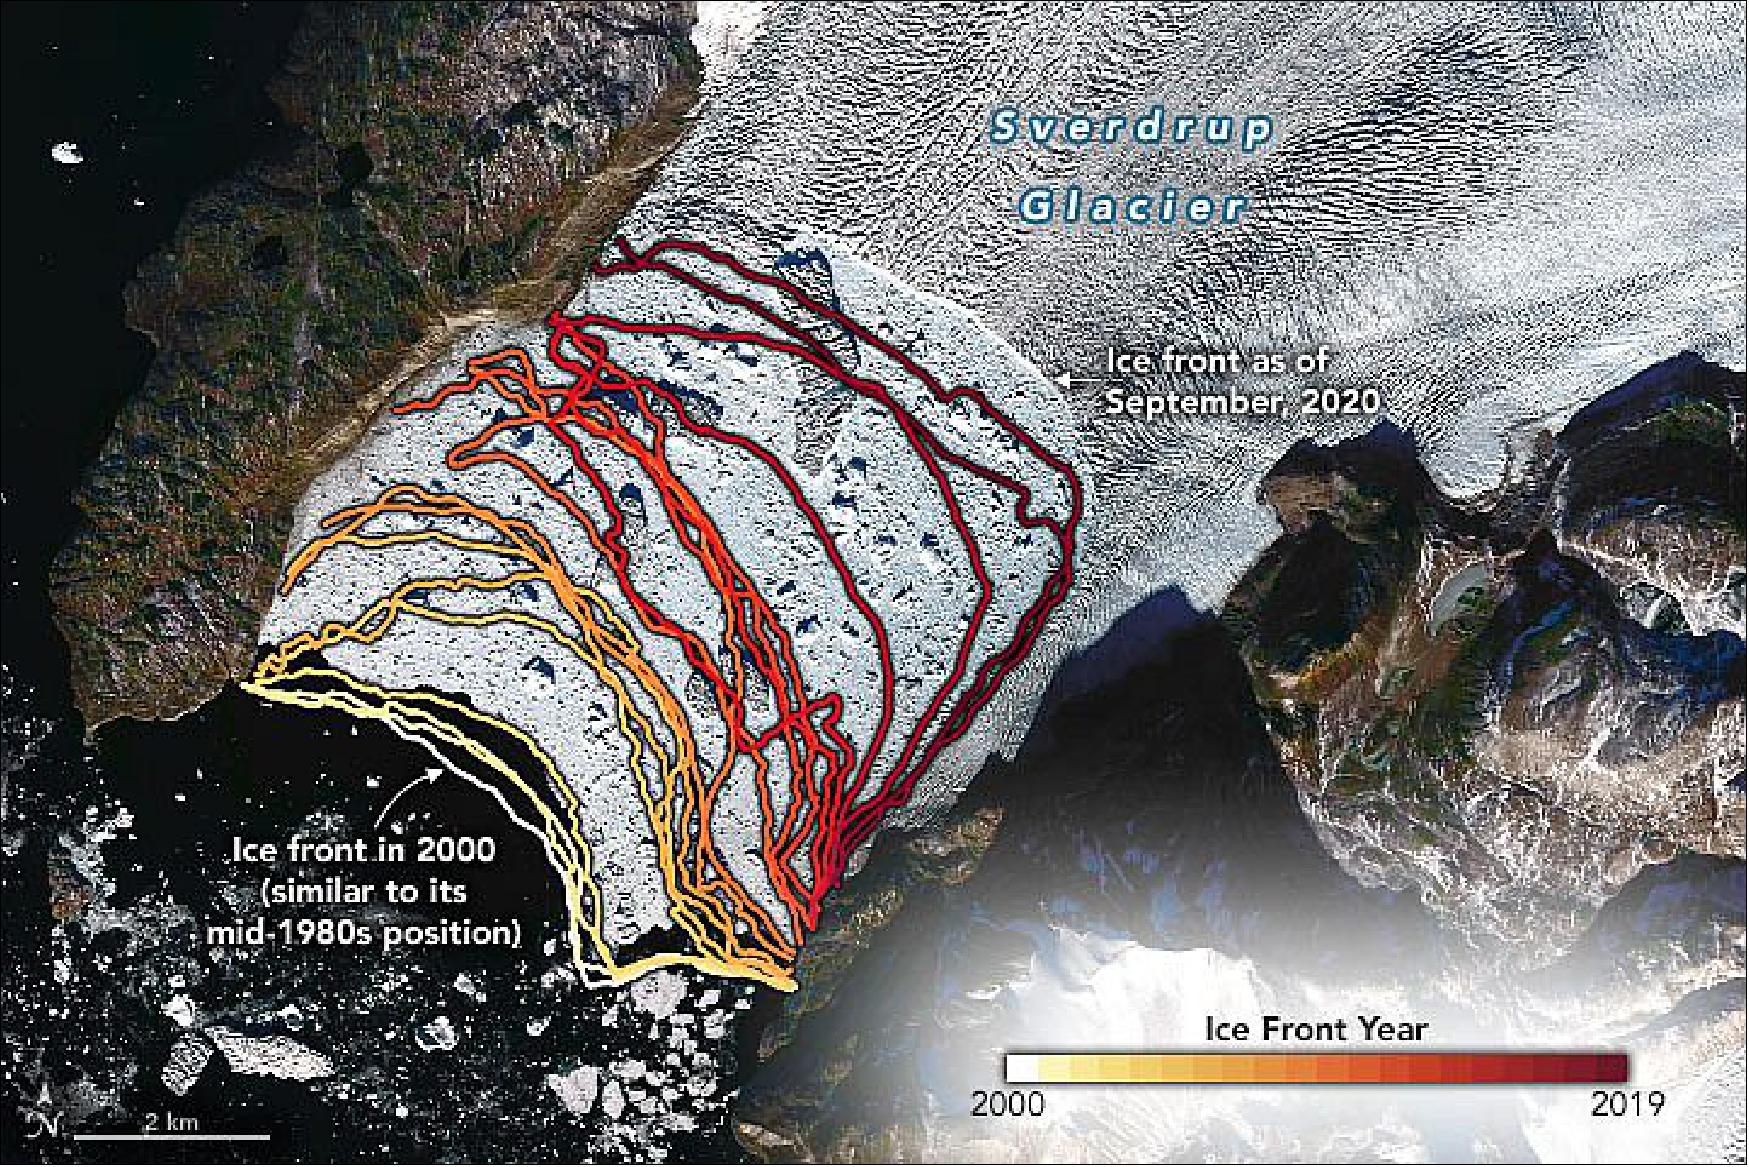 Figure 13: This image, acquired by the OLI instrument on Landsat-8, shows Sverdrup Glacier on September 21, 2020. Lines indicate the retreating position of the glacier front since 2000. The position in 2000 was similar to the mid-1980s, indicating that there had been a period of stability when ocean temperatures were cool. Then, between 1998 and 2007 (Landsat-7), waters around Greenland warmed rapidly—almost 2 degrees Celsius—and the glacier started to thin, flow faster, and retreat (image credit: NASA Earth Observatory image by Joshua Stevens, using Landsat data from the U.S. Geological Survey and data courtesy of Wood, M. et al. (2021). Story by Kathryn Hansen and Ian O’Neill)